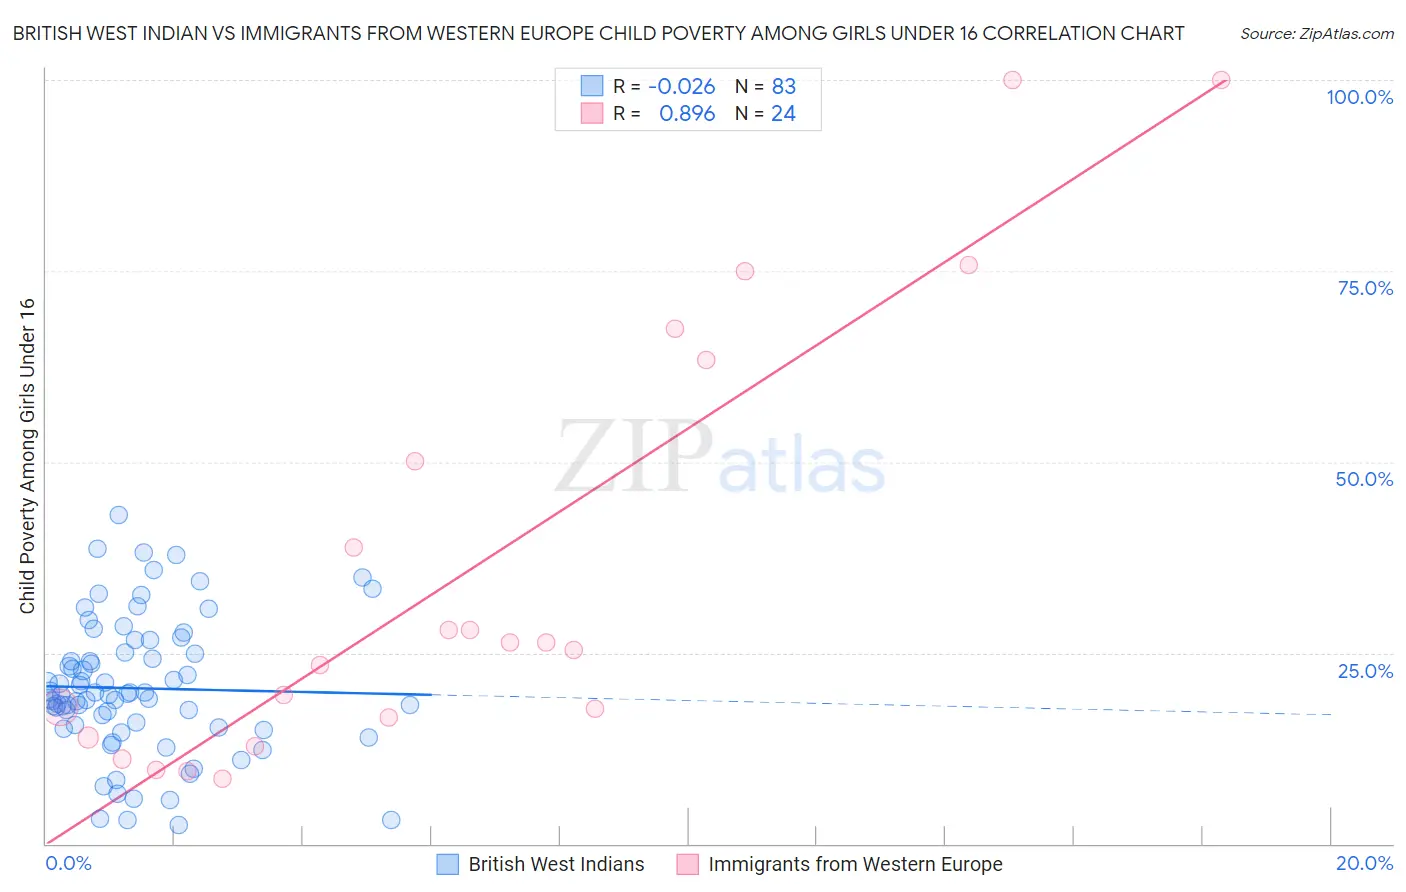 British West Indian vs Immigrants from Western Europe Child Poverty Among Girls Under 16